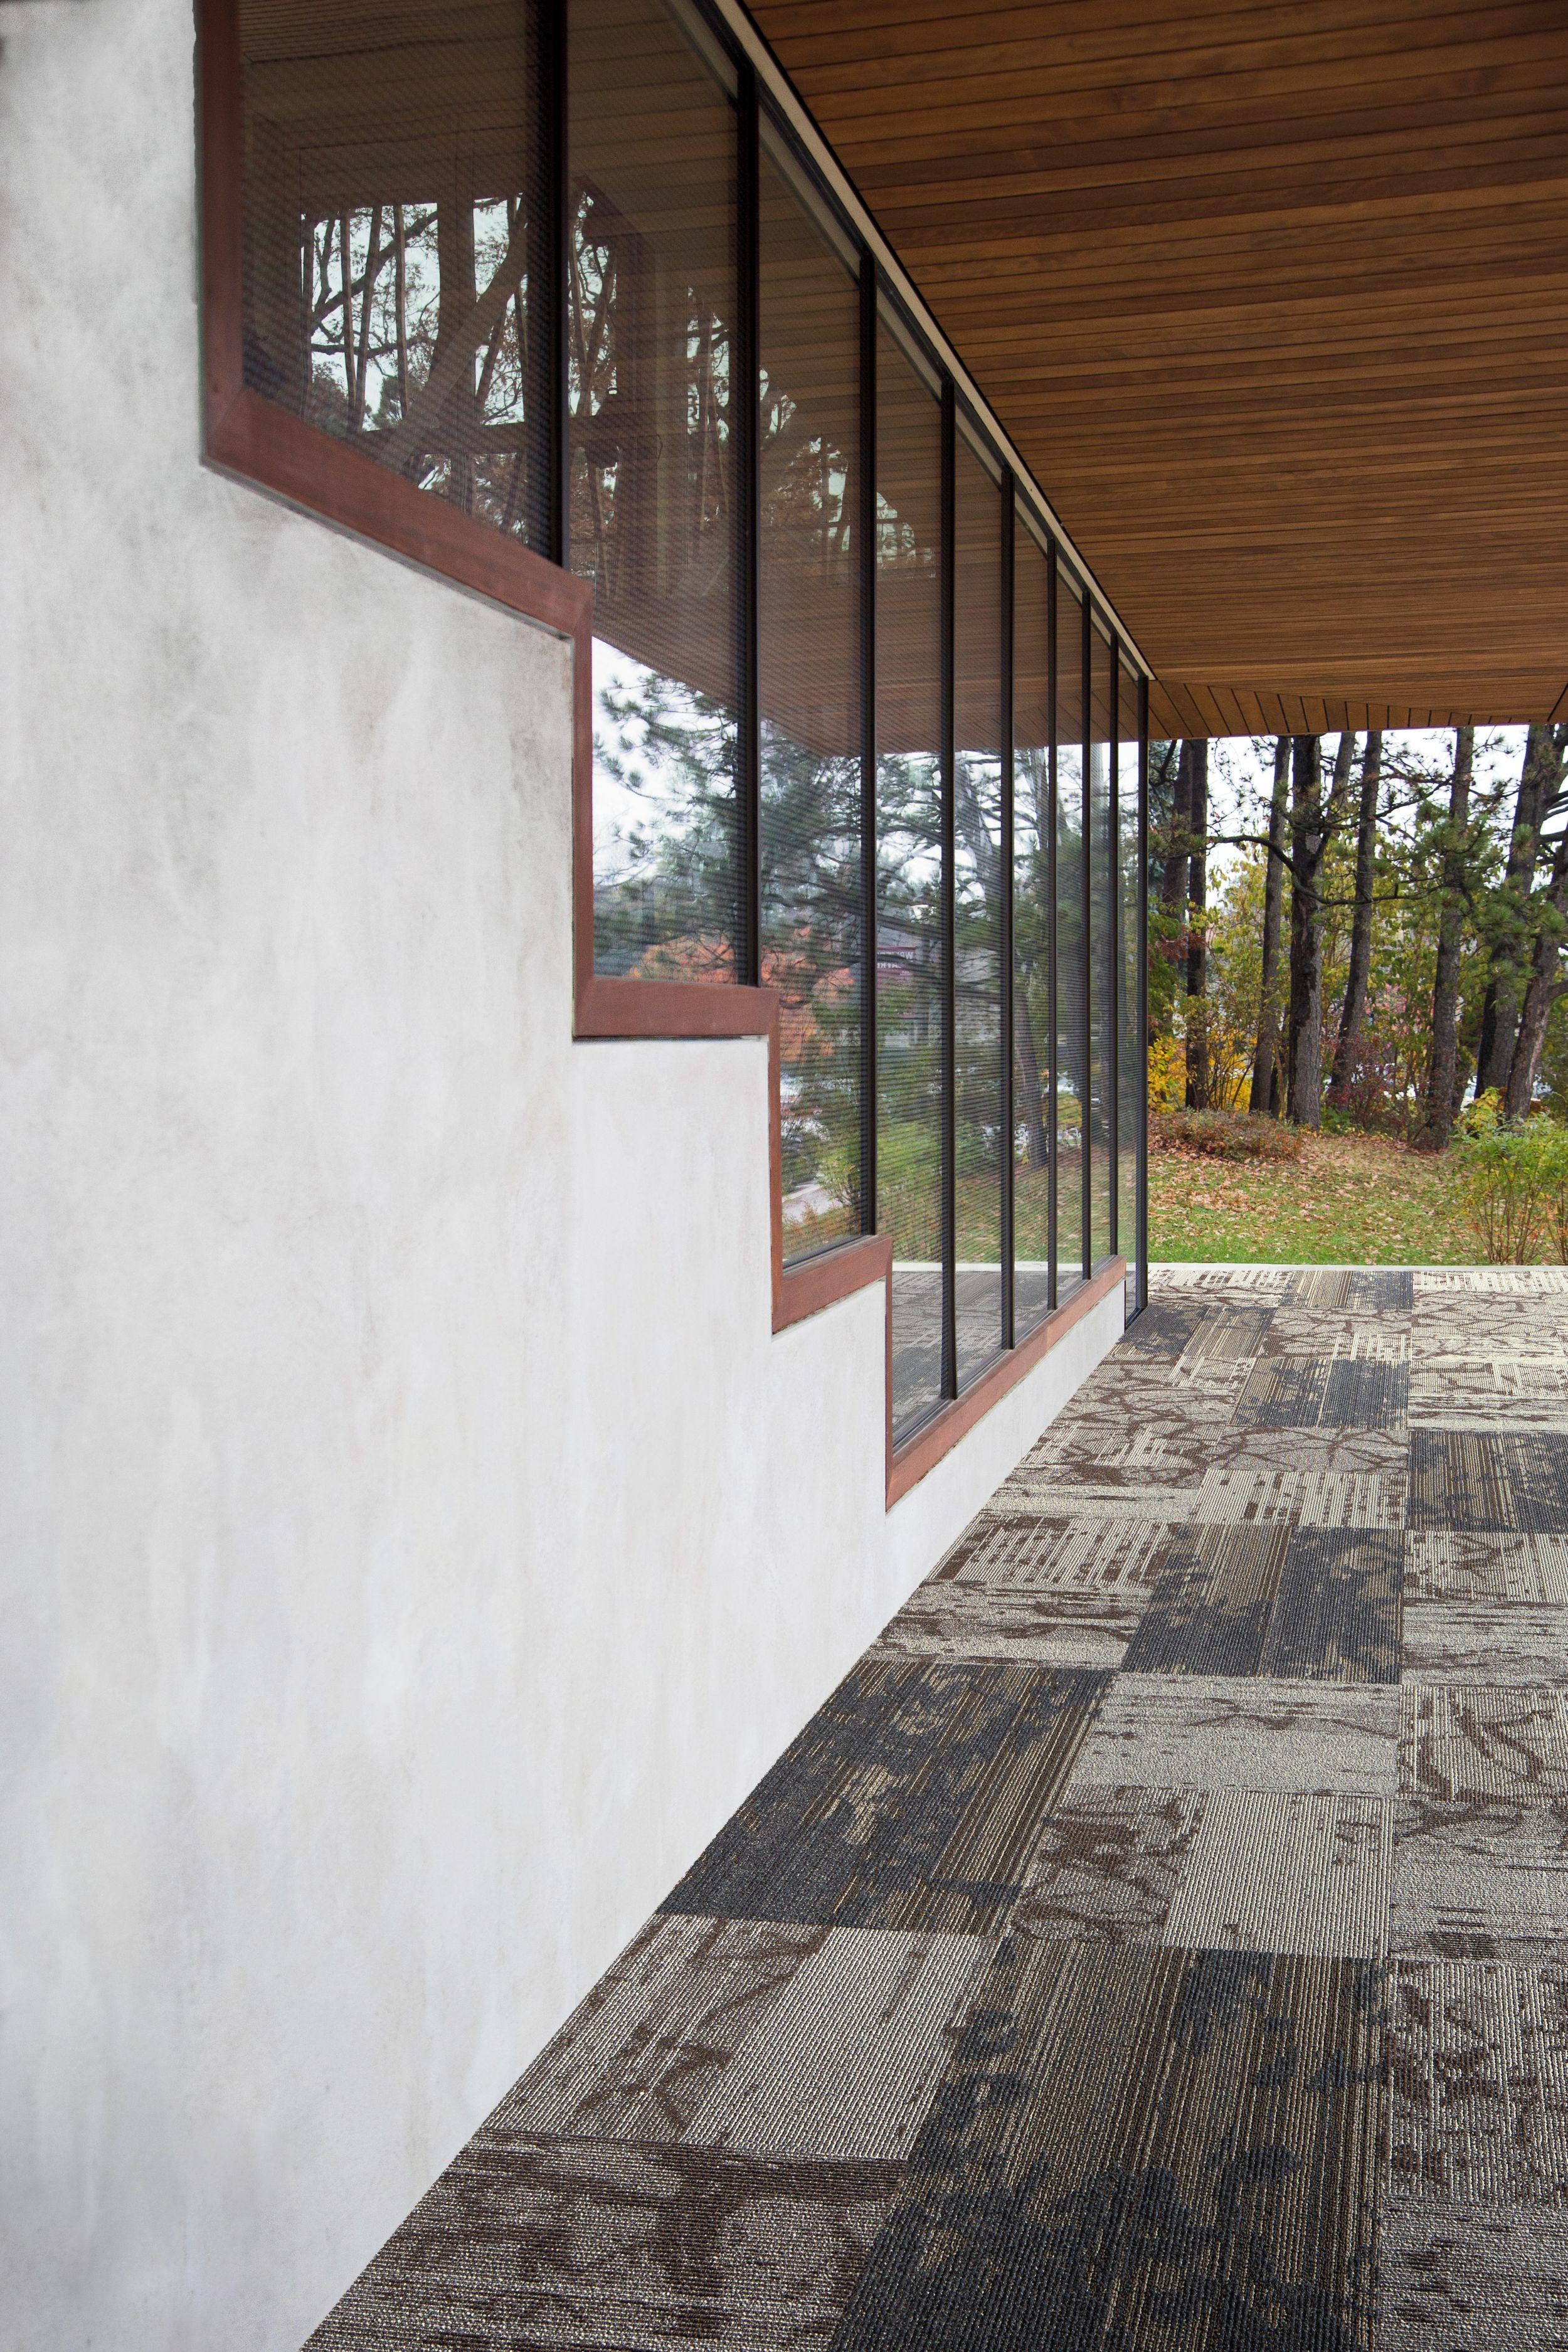 Interface Glazing and Ground plank carpet tile shown for inspiration in outdoor setting numéro d’image 14